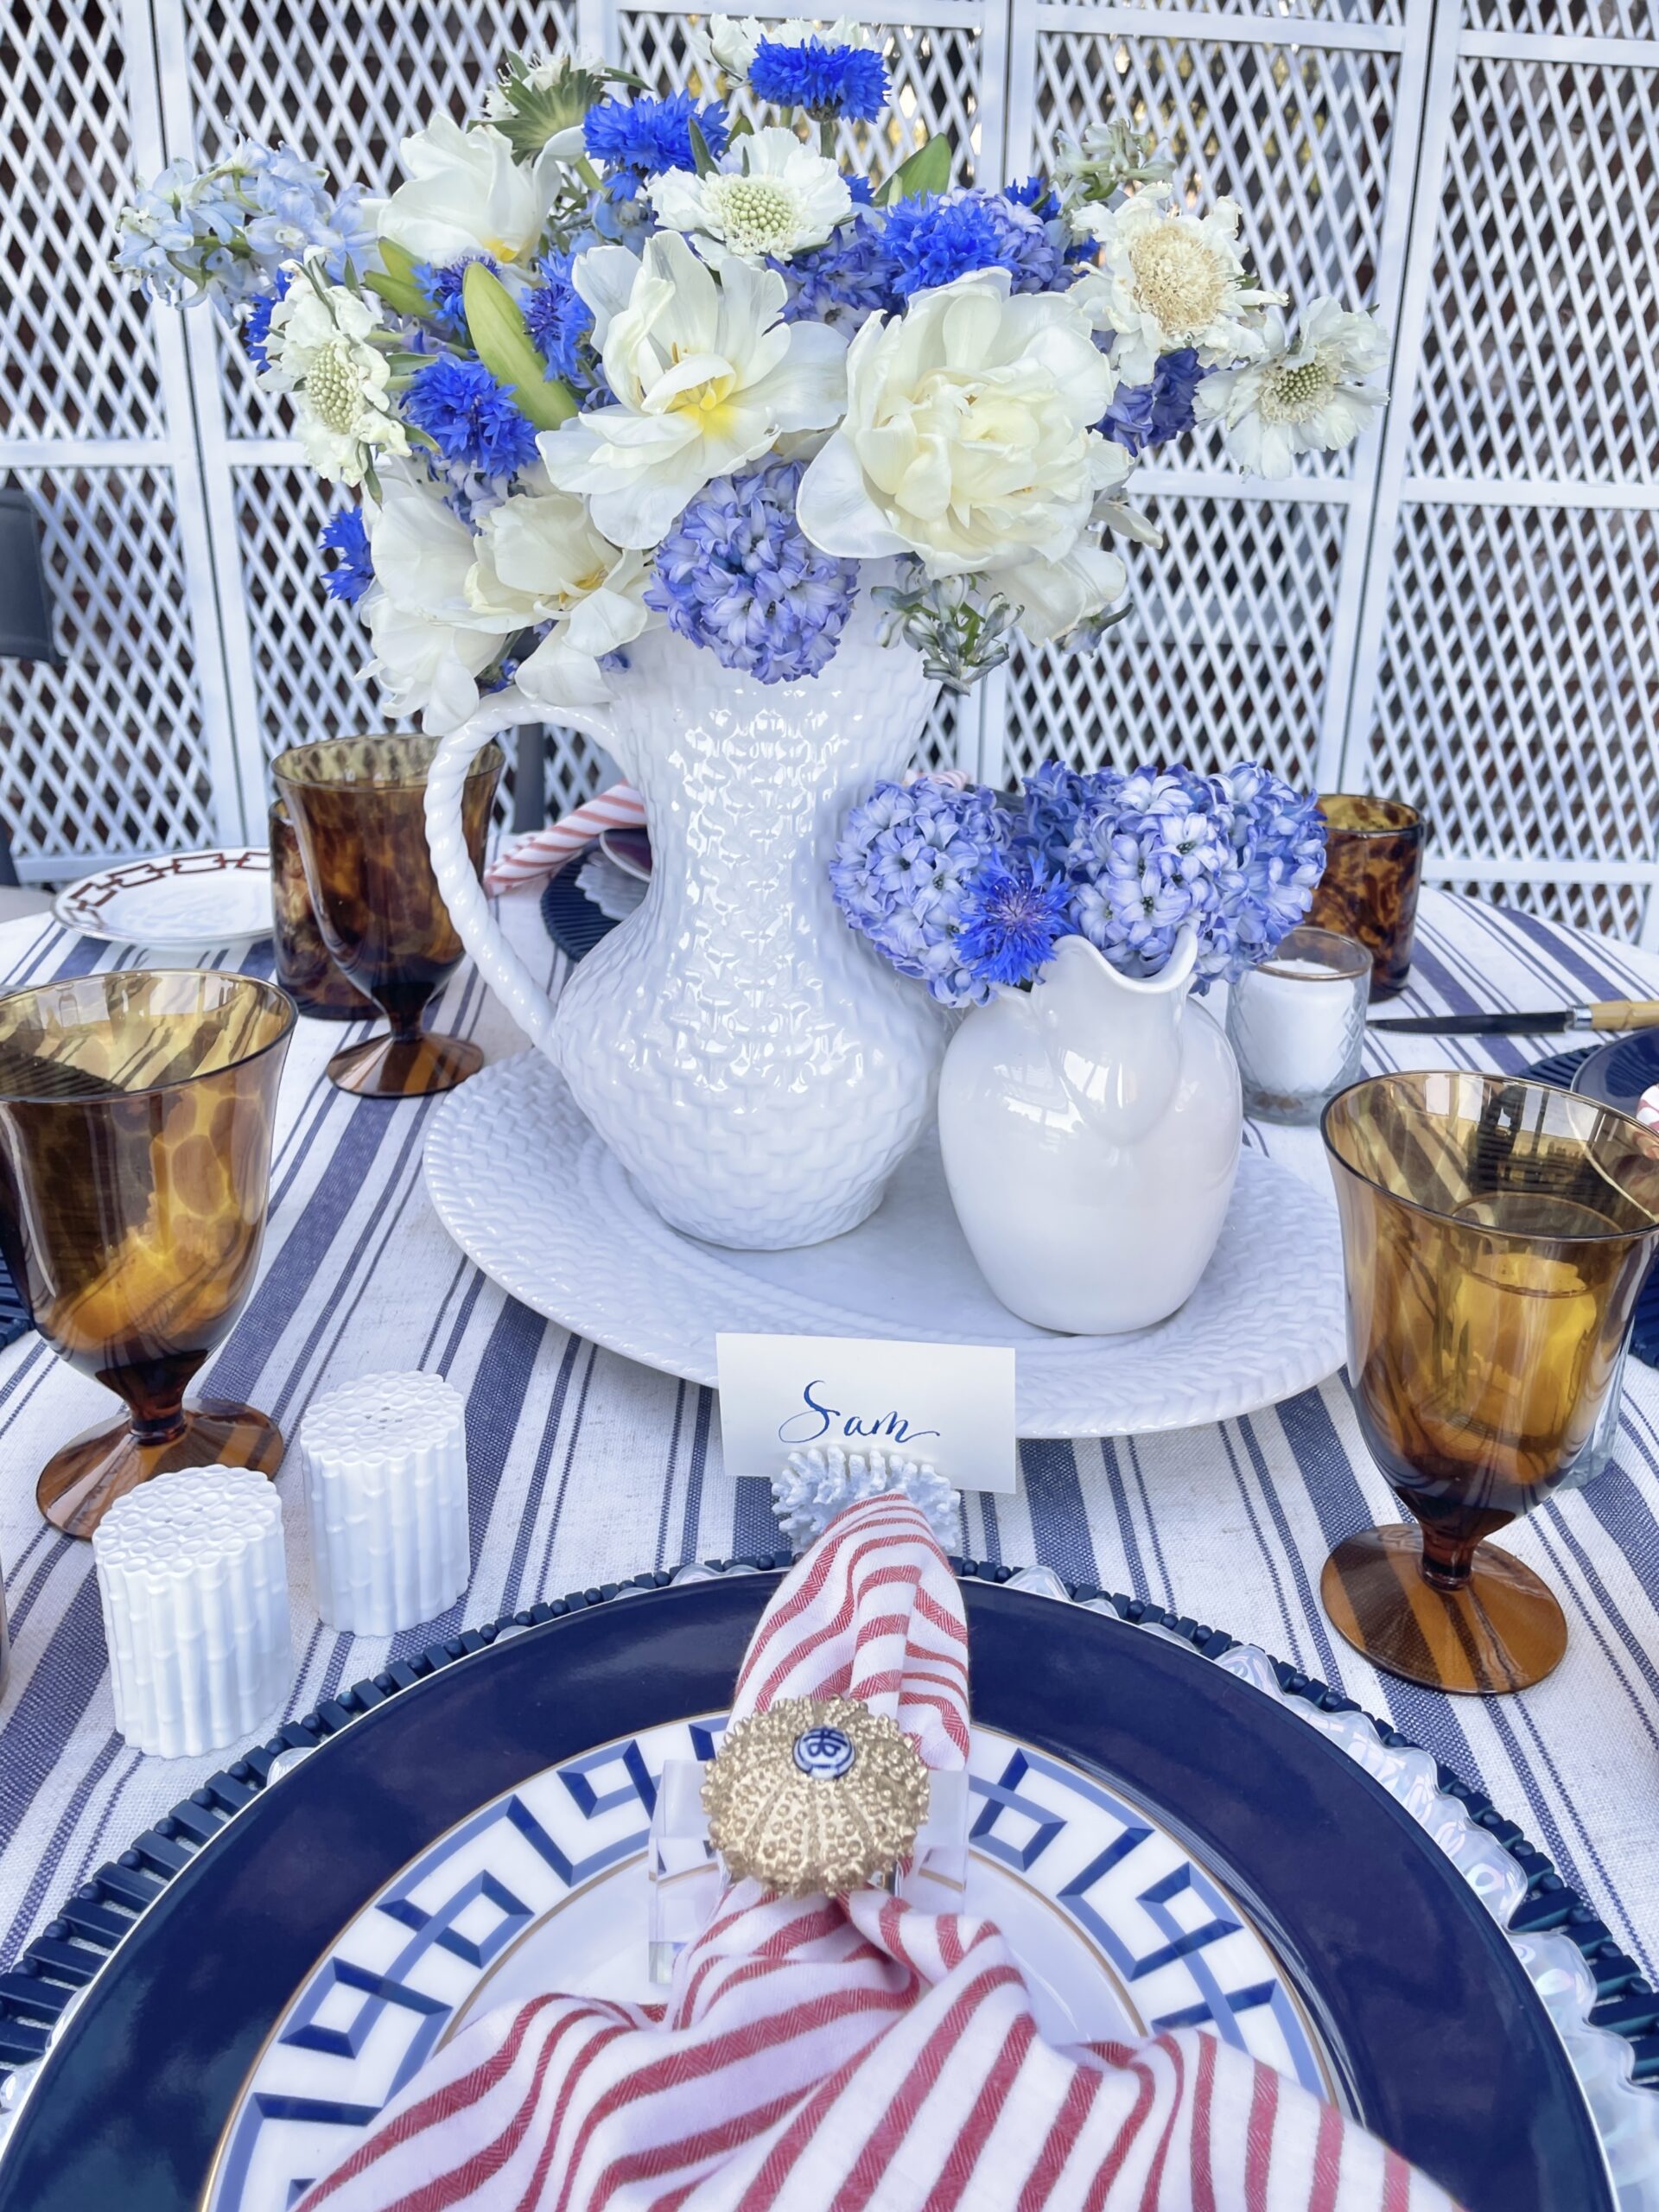 Nautical Table Decor for a Summer Blue and White Party in Blue and White